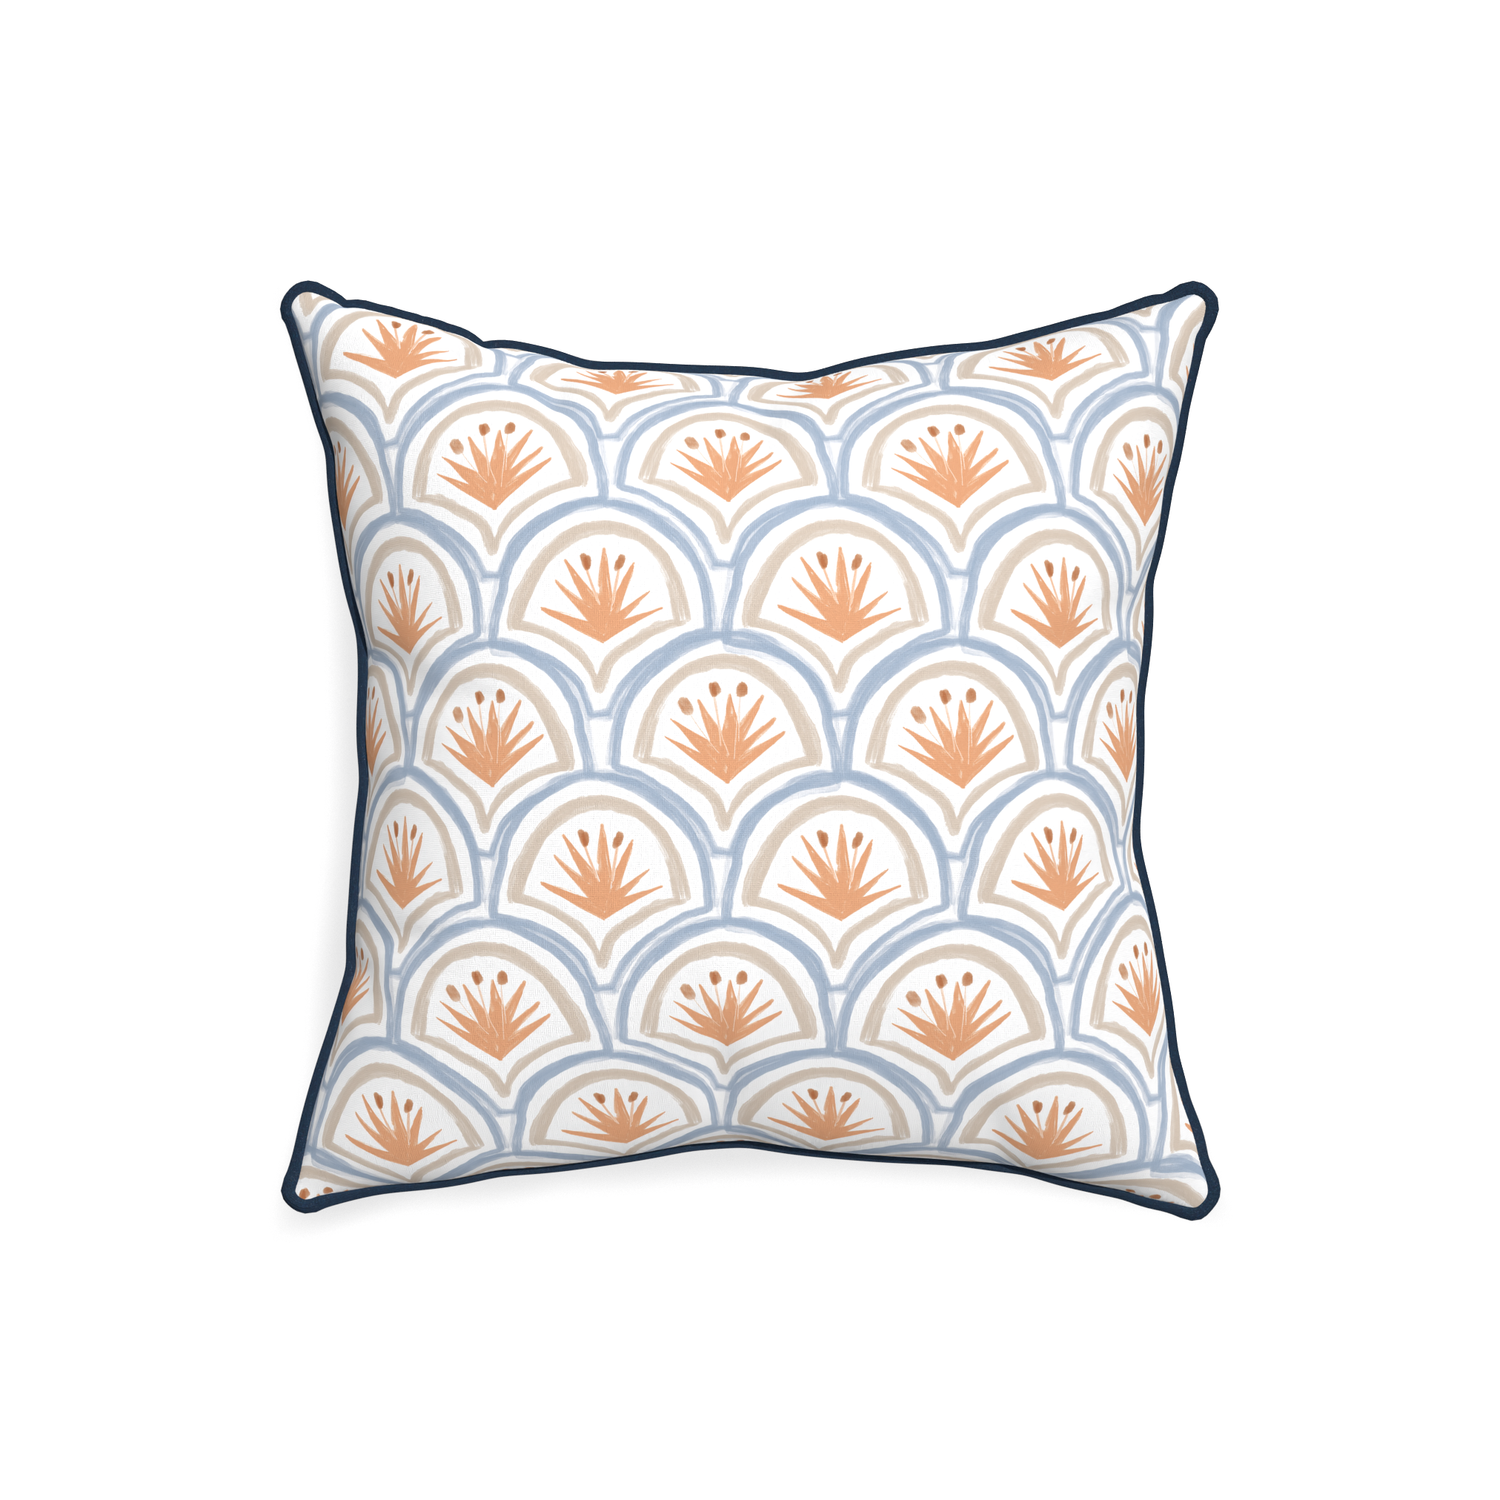 20-square thatcher apricot custom art deco palm patternpillow with c piping on white background